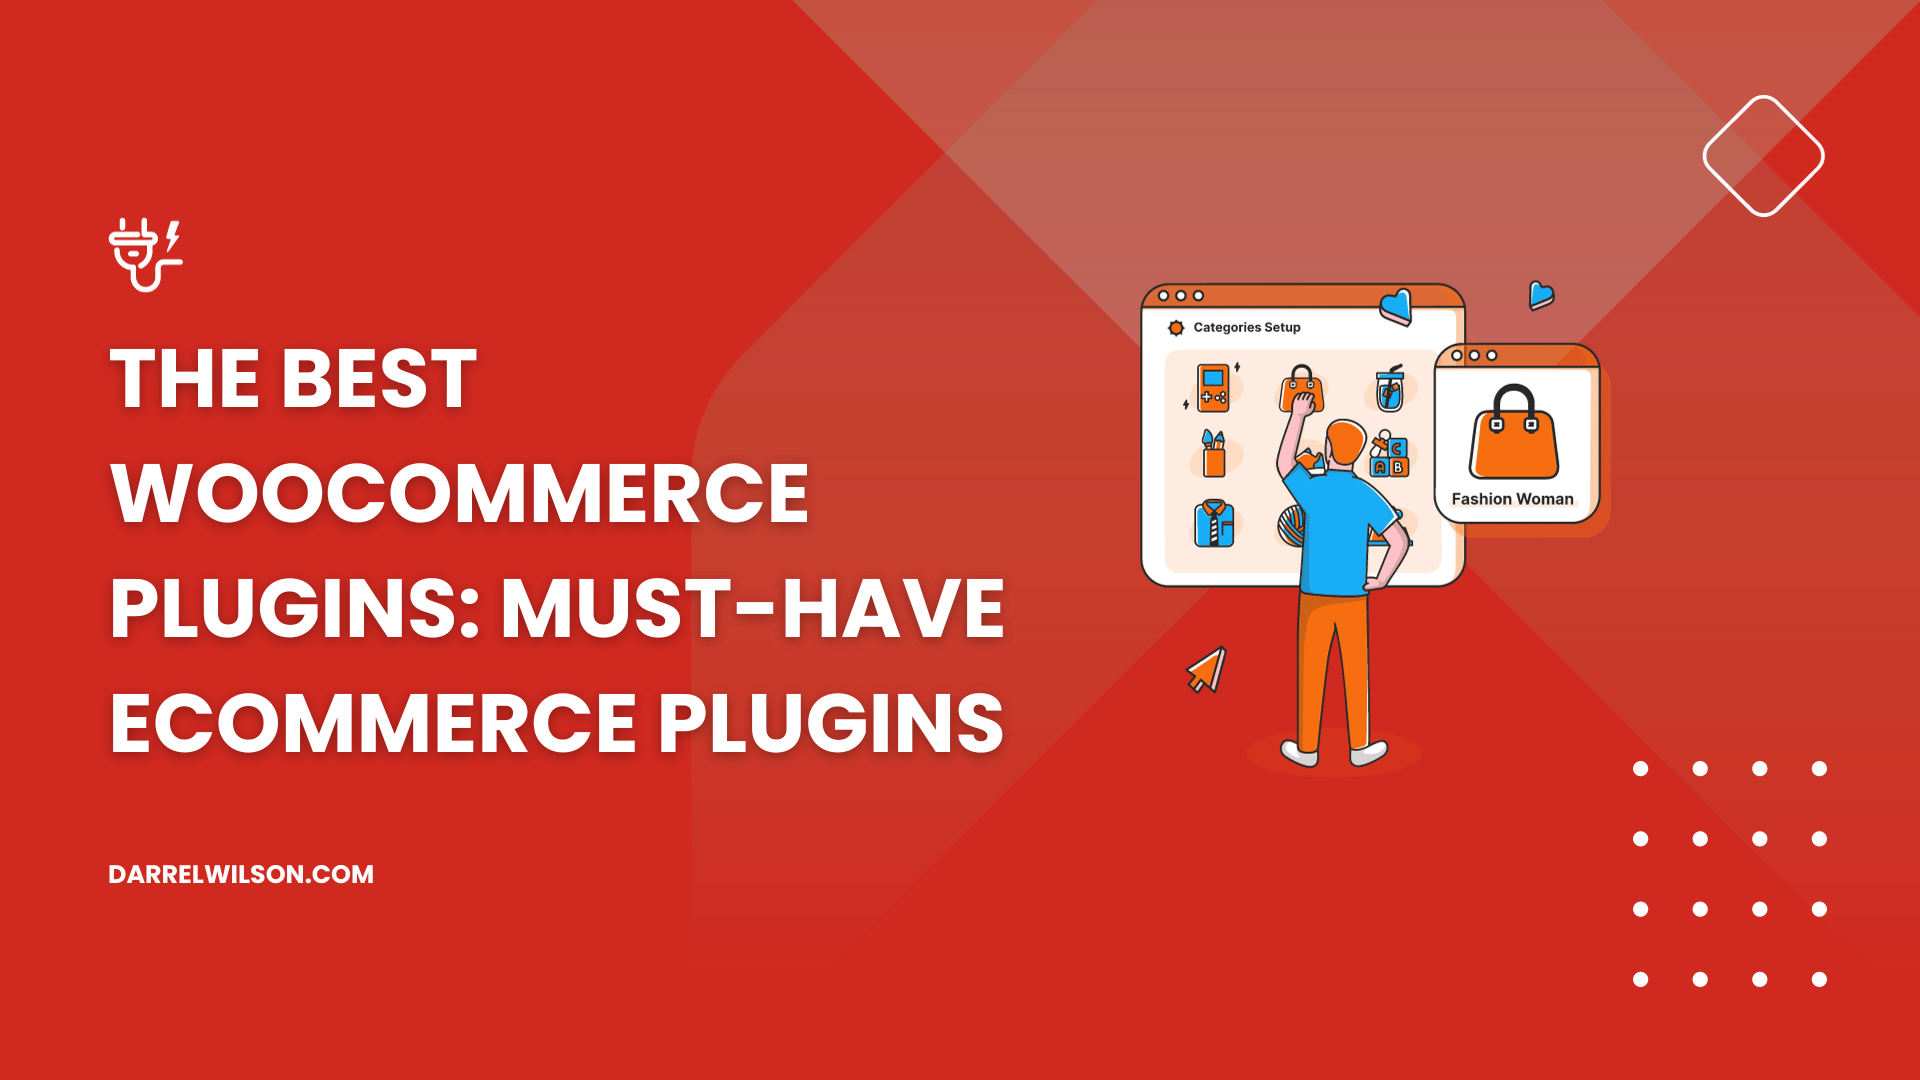 The Best WooCommerce Plugins: Must-Have Ecommerce Plugins